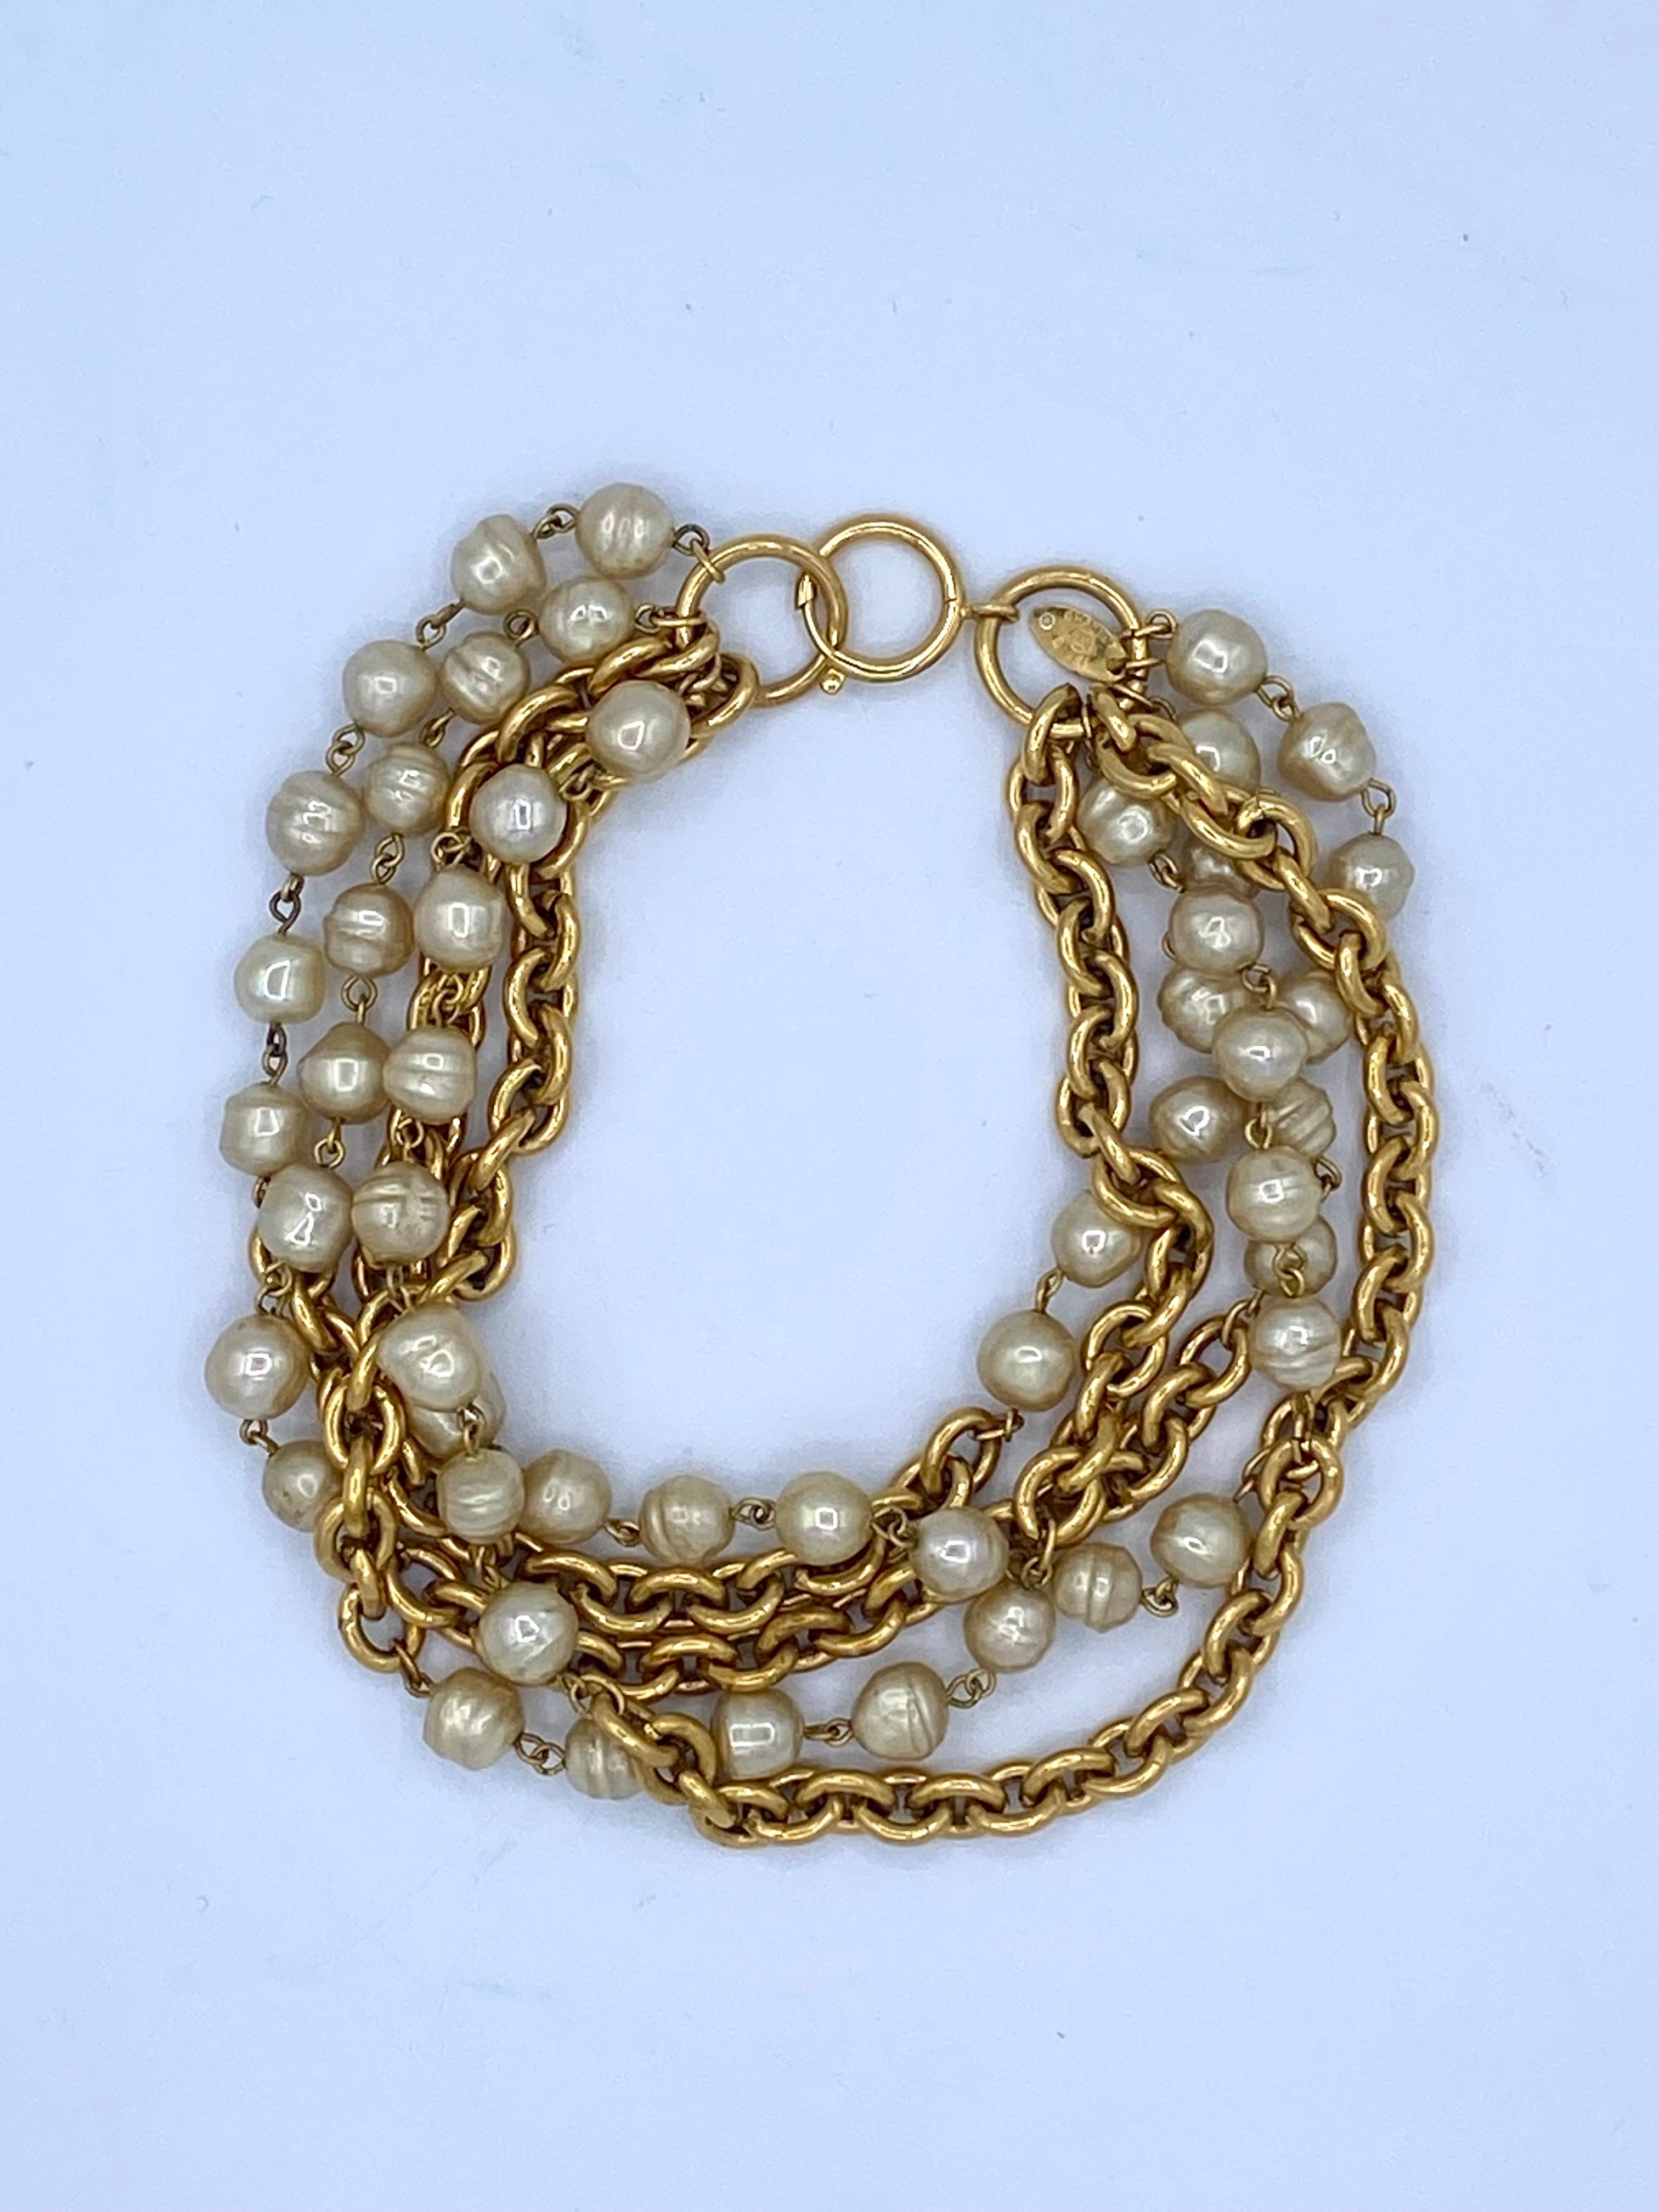 Vintage 1985 Chanel pearl and golden chain choker necklace, 5 rows, round zipper clasp with a small medallion stamped Chanel.
Made in France.
Length 35.5cm
Width 4.5cm
Delivered in a Chanel box.
Some slight traces of use which in no way affect the